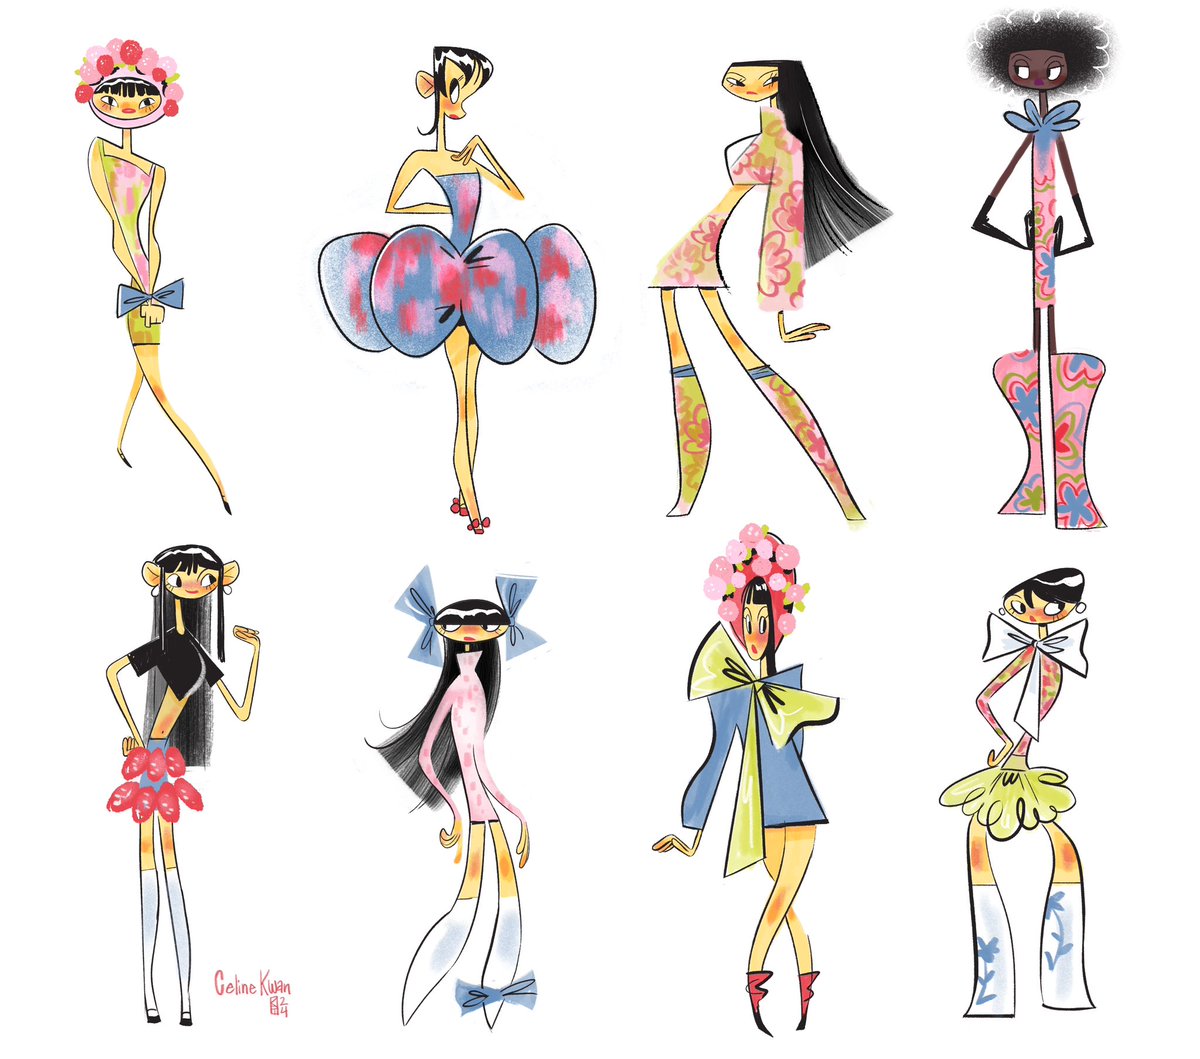 Shape play inspired by the fashions of @celinekwan_ #shapelanguage #fashiondesign #characterdesign